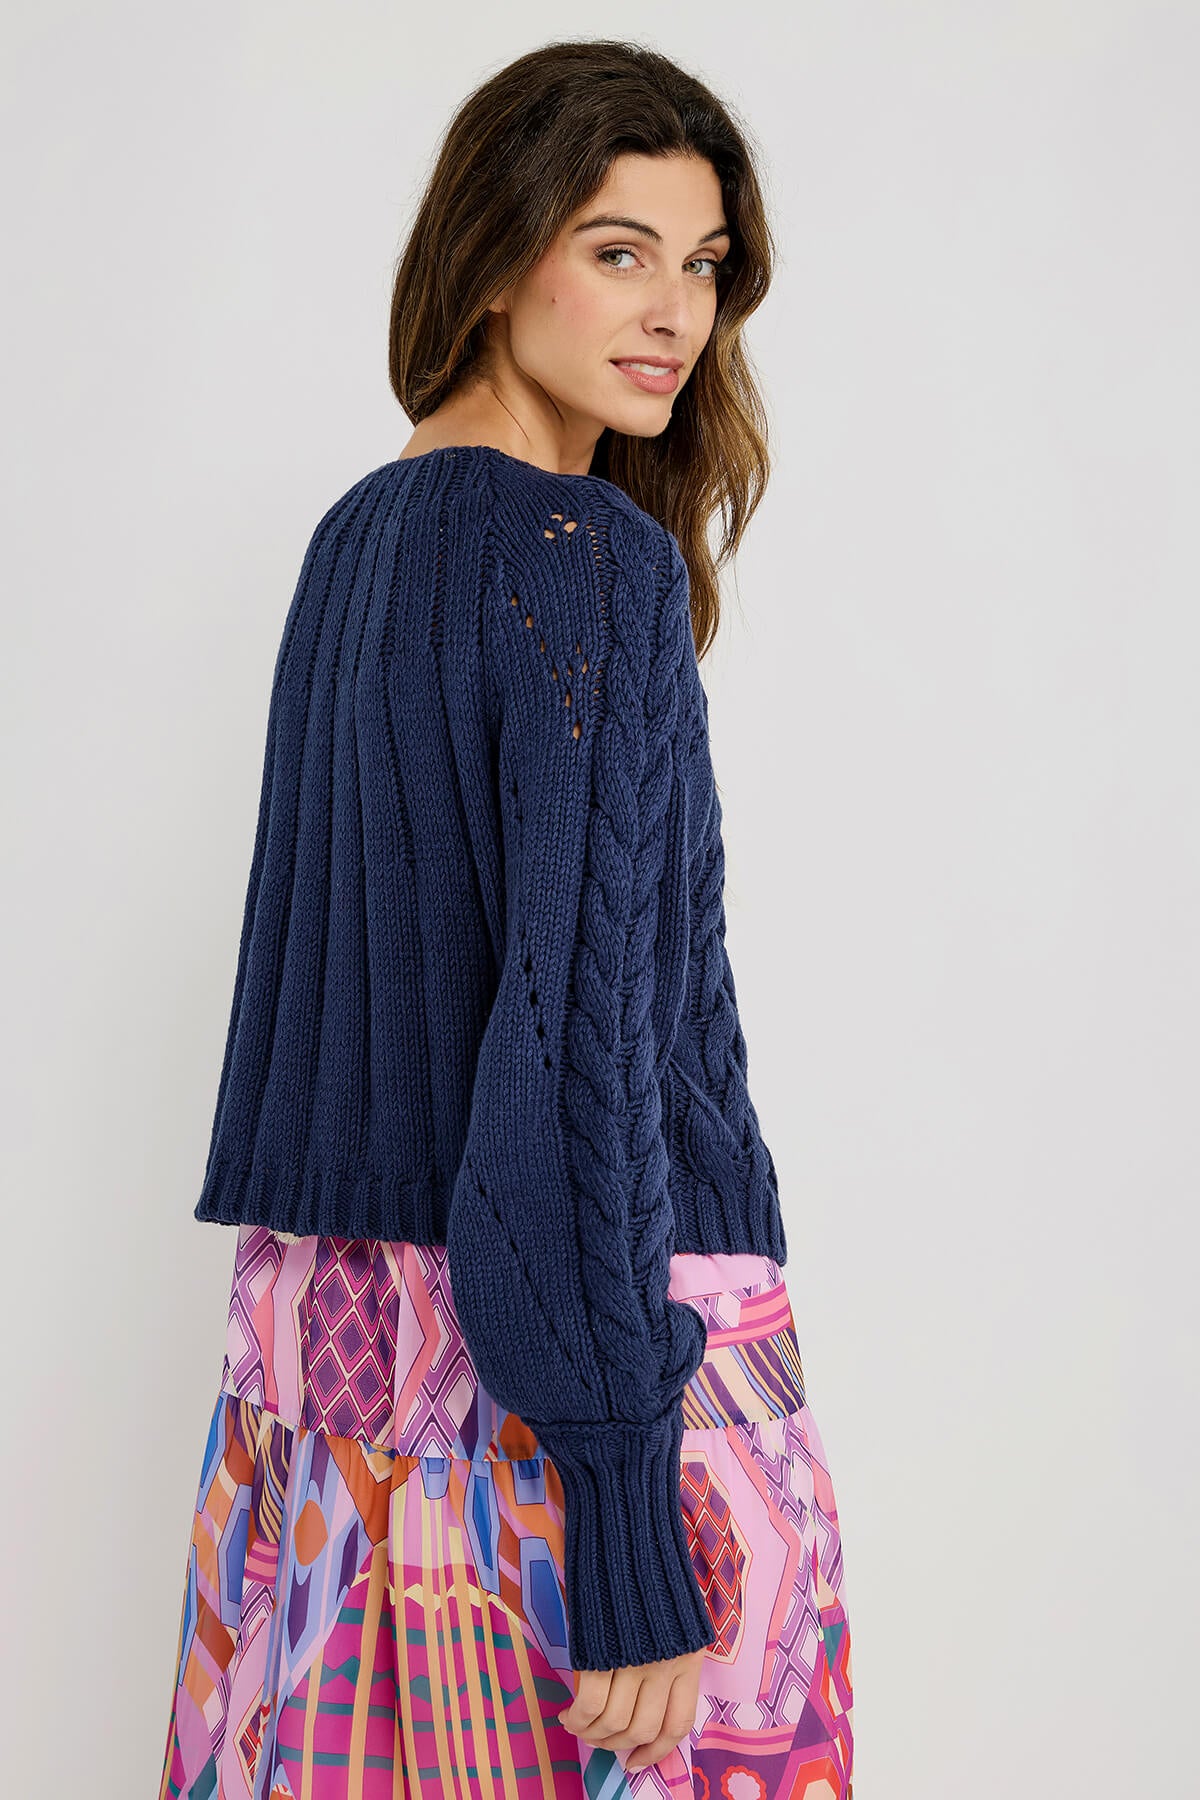 Free People Sandre Pullover